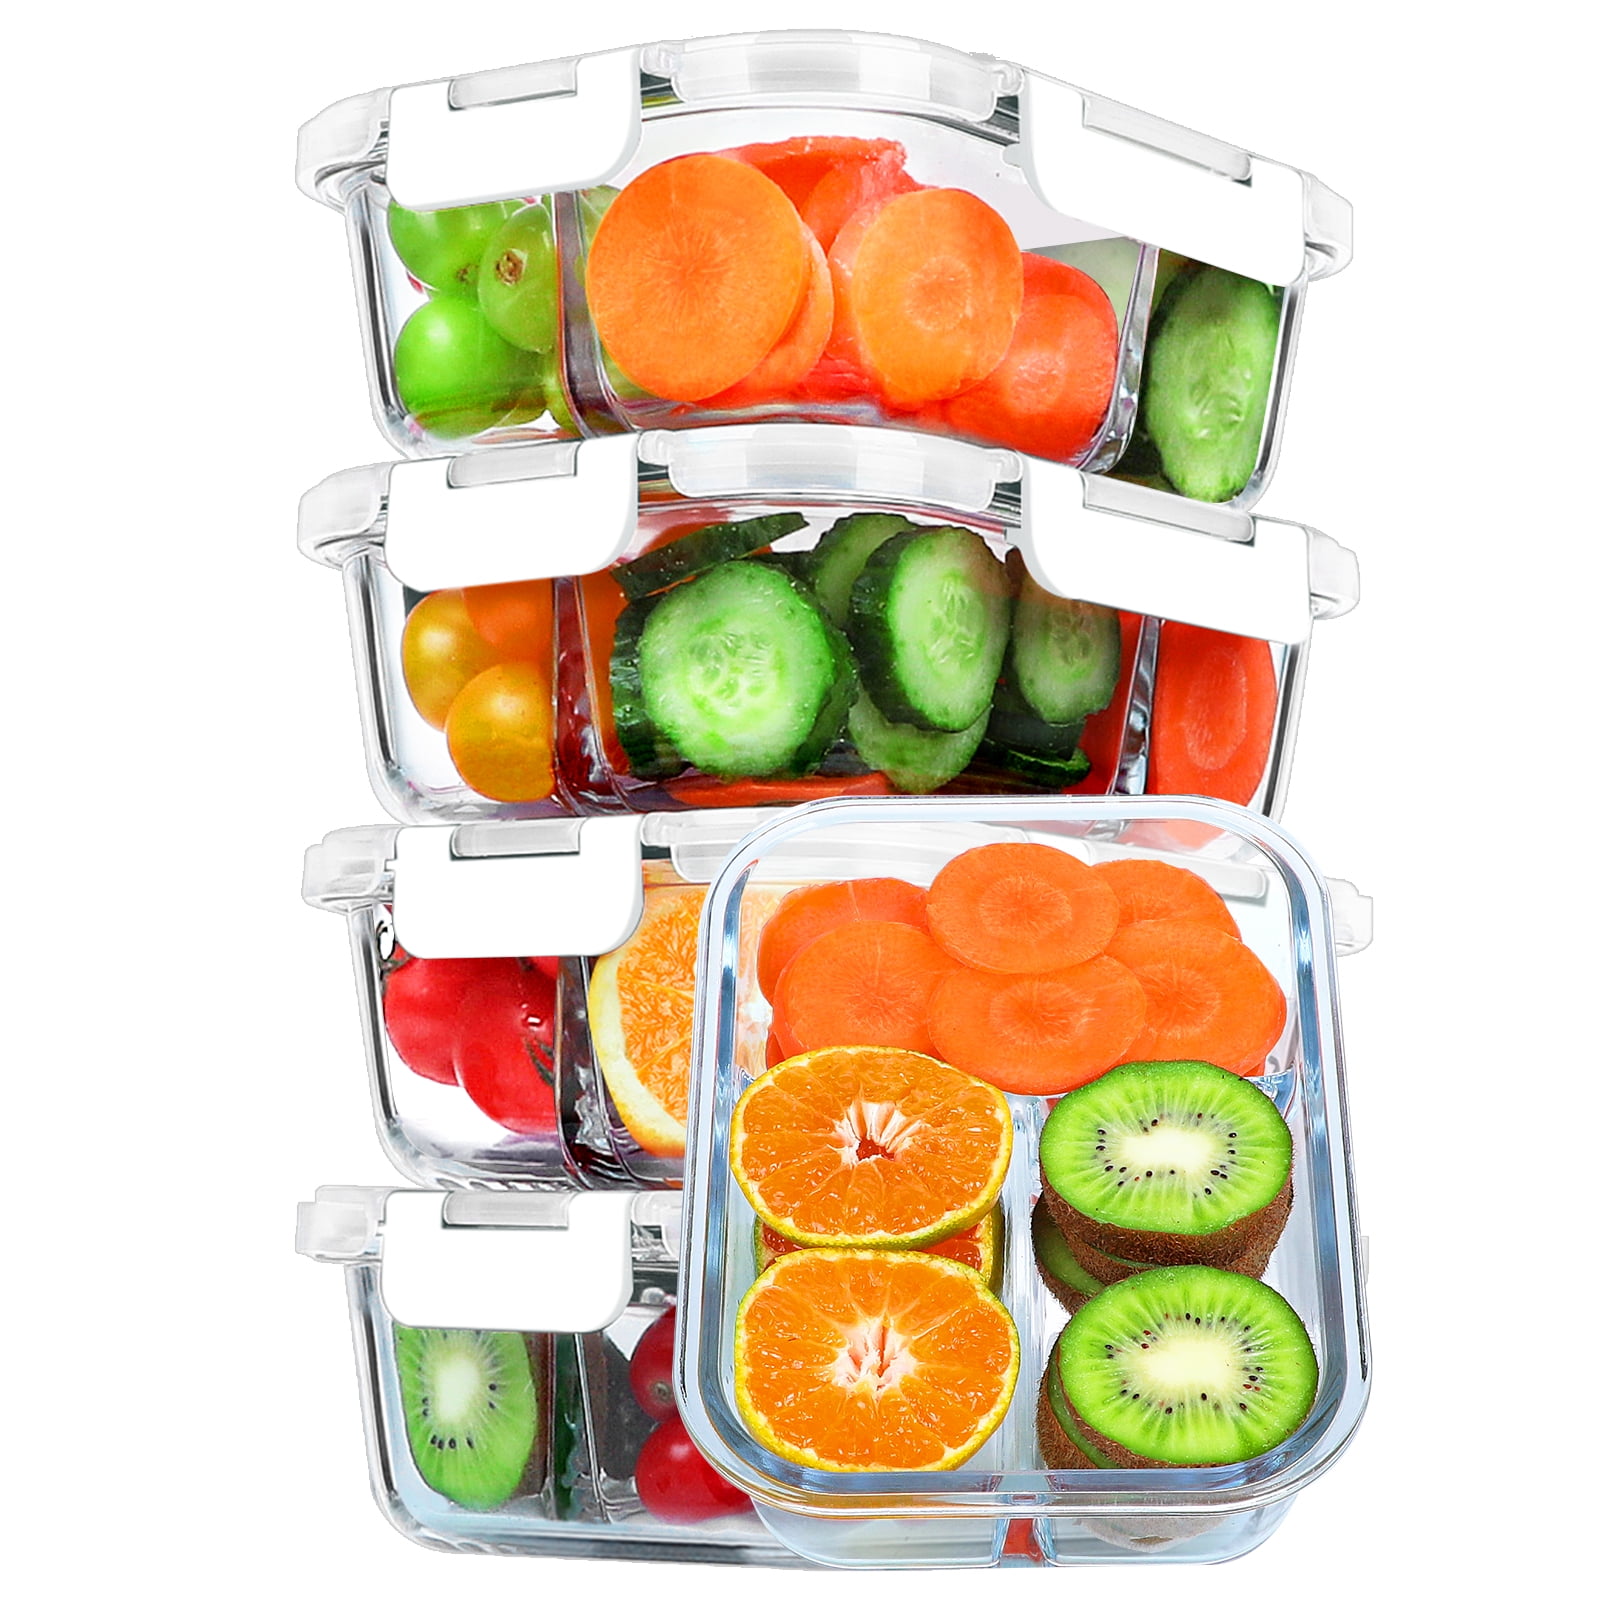 5-Pack, 36 Oz]Glass Meal Prep Containers 3 Compartment with Lids, BPA-Free Food  Storage Glass Lunch Containers Bento Box for Microwave, Oven, Freezer,  Dishwasher 